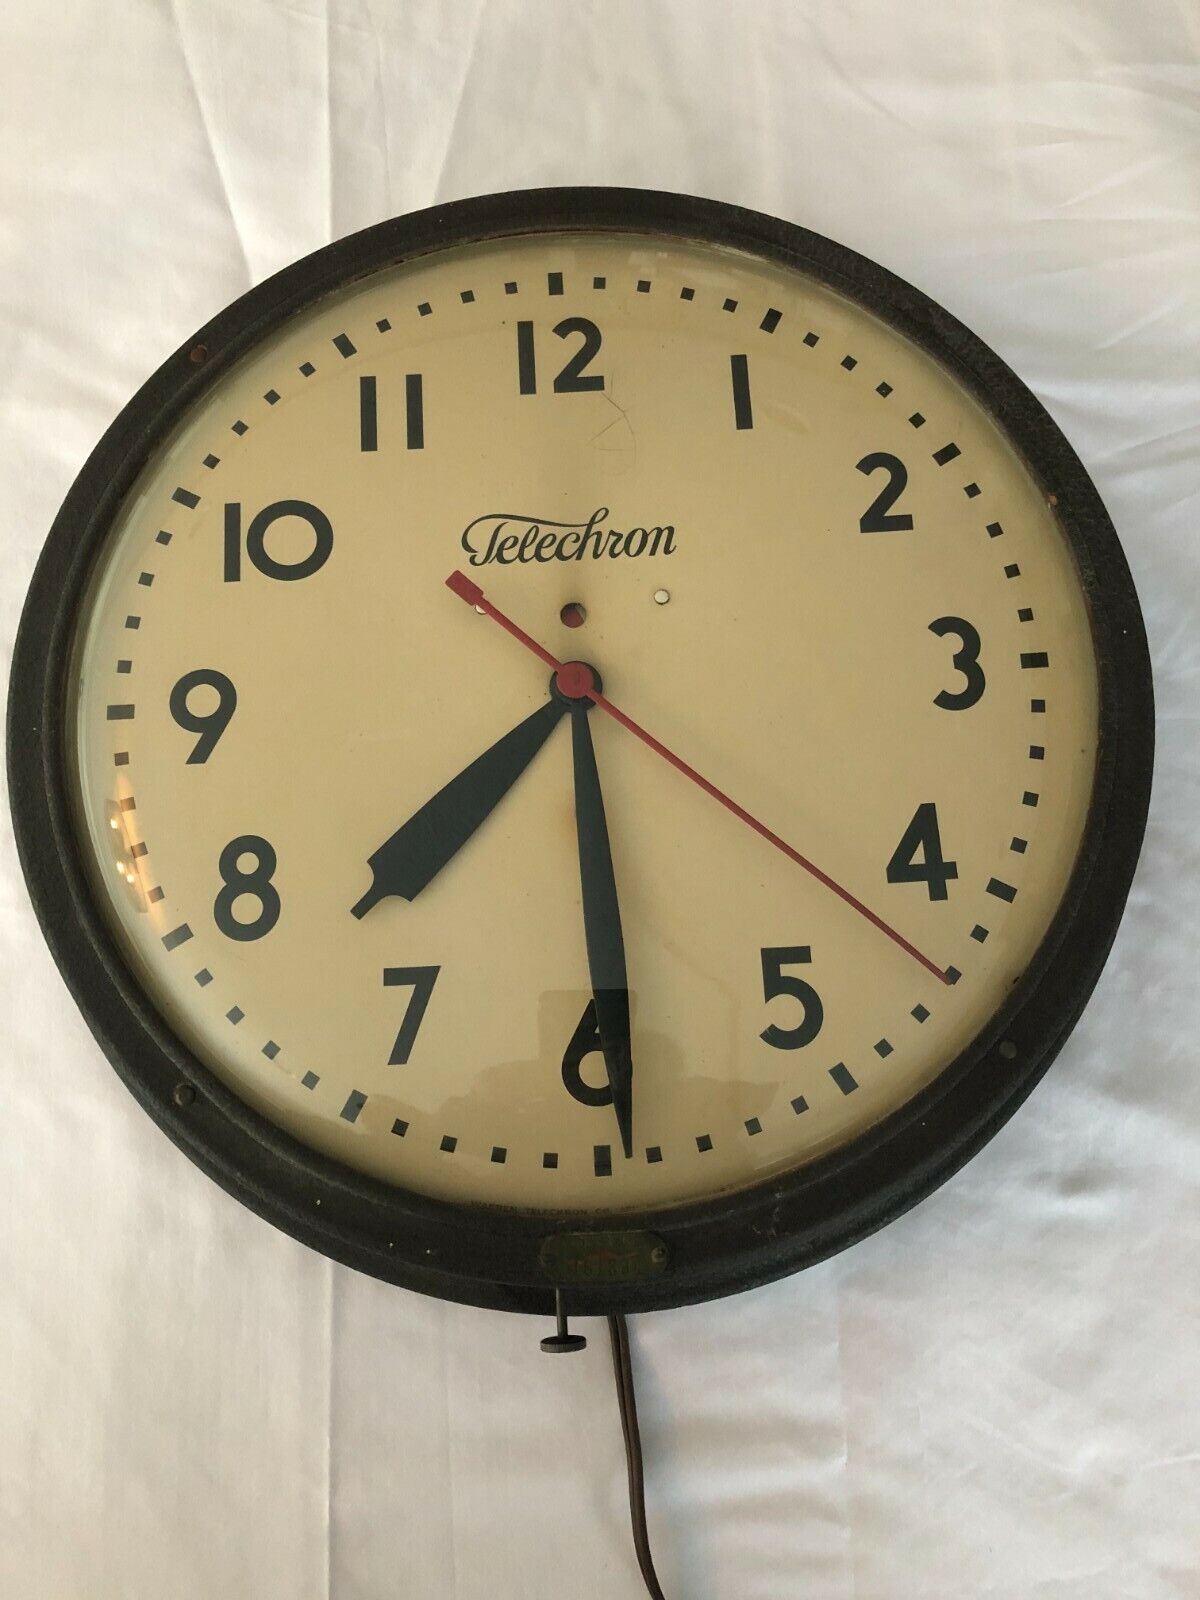 VINTAGE TELECHRON post war [45-49] commercial wall clock with O.S.U. name plate